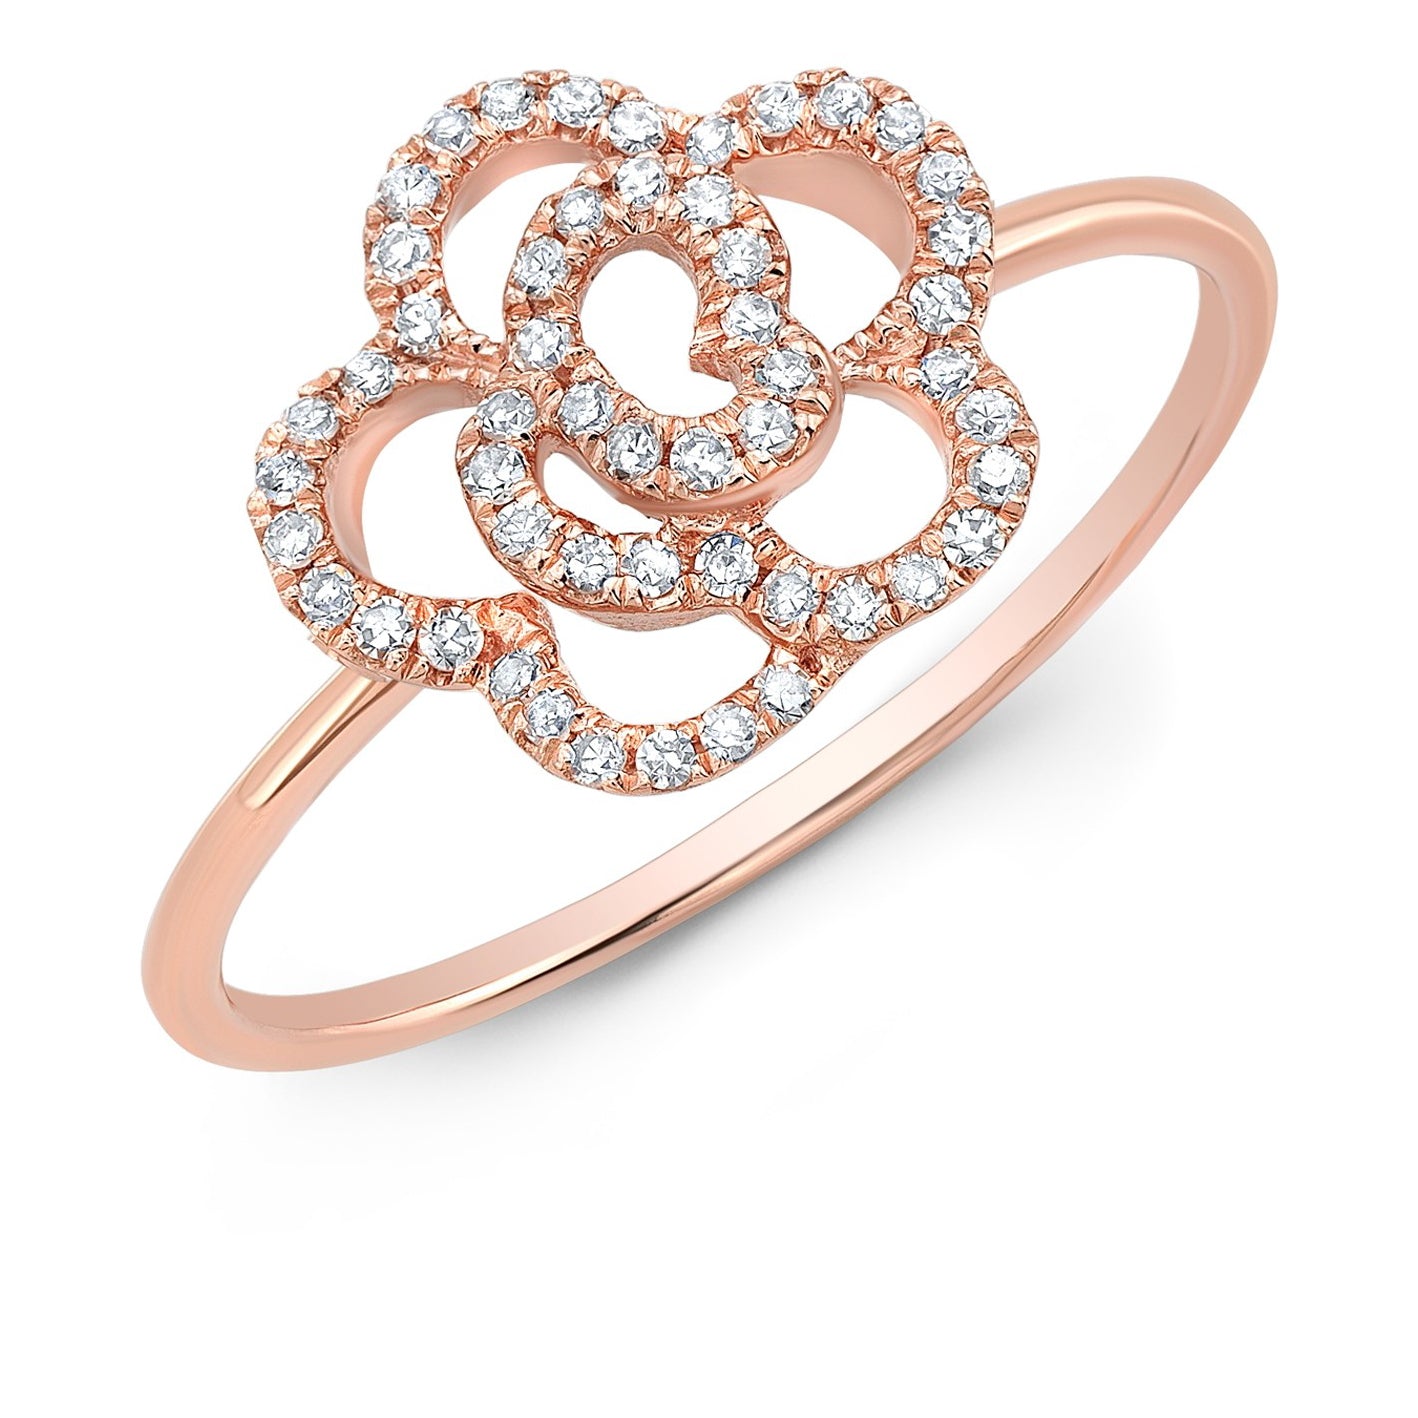 Floral Engagement Ring Rose Gold Ring Infinity Twist Pear Shape Ring M